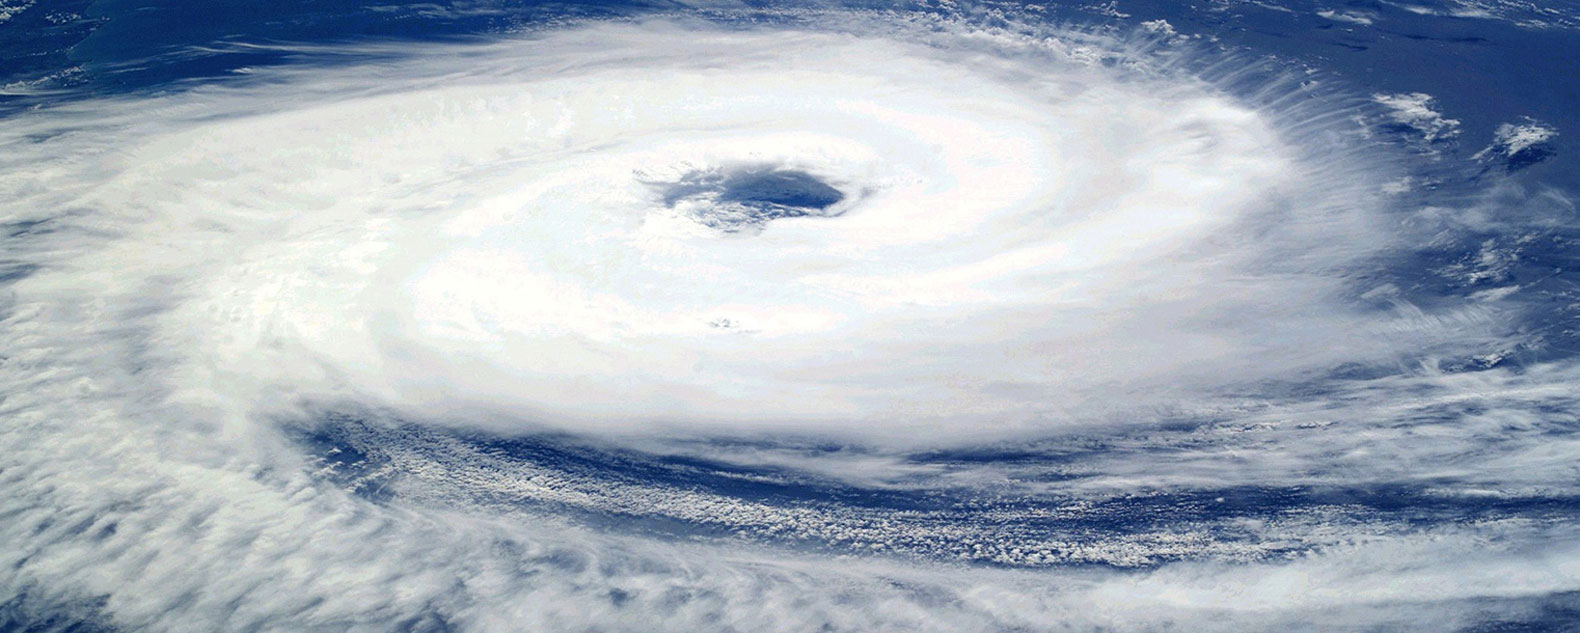 Satellite view of a hurricane over ocean